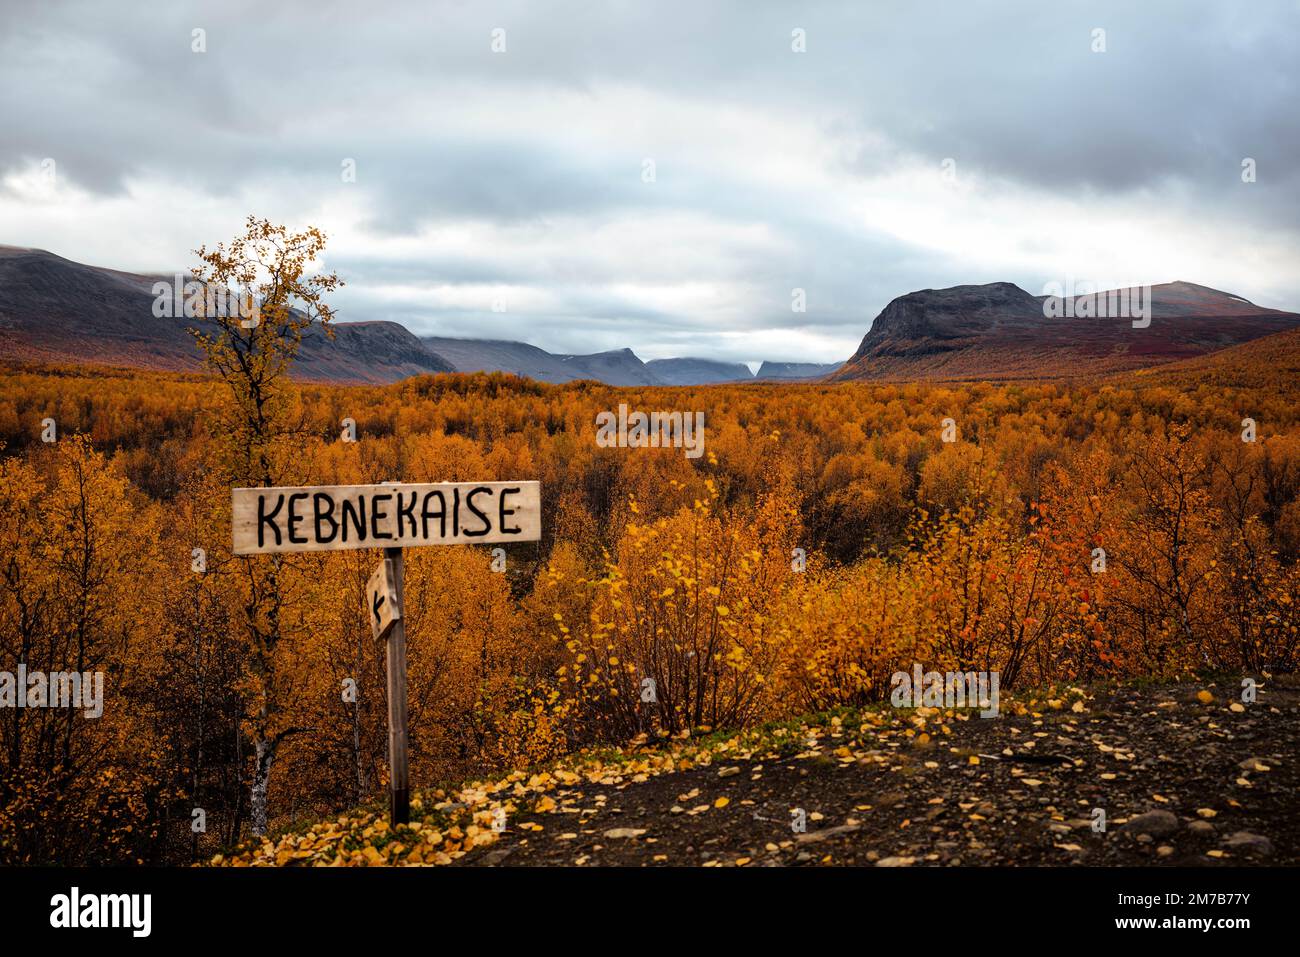 A Kebnekaise road sign with an autumn forest in the background, Nikkaluokta, Schweden Stock Photo